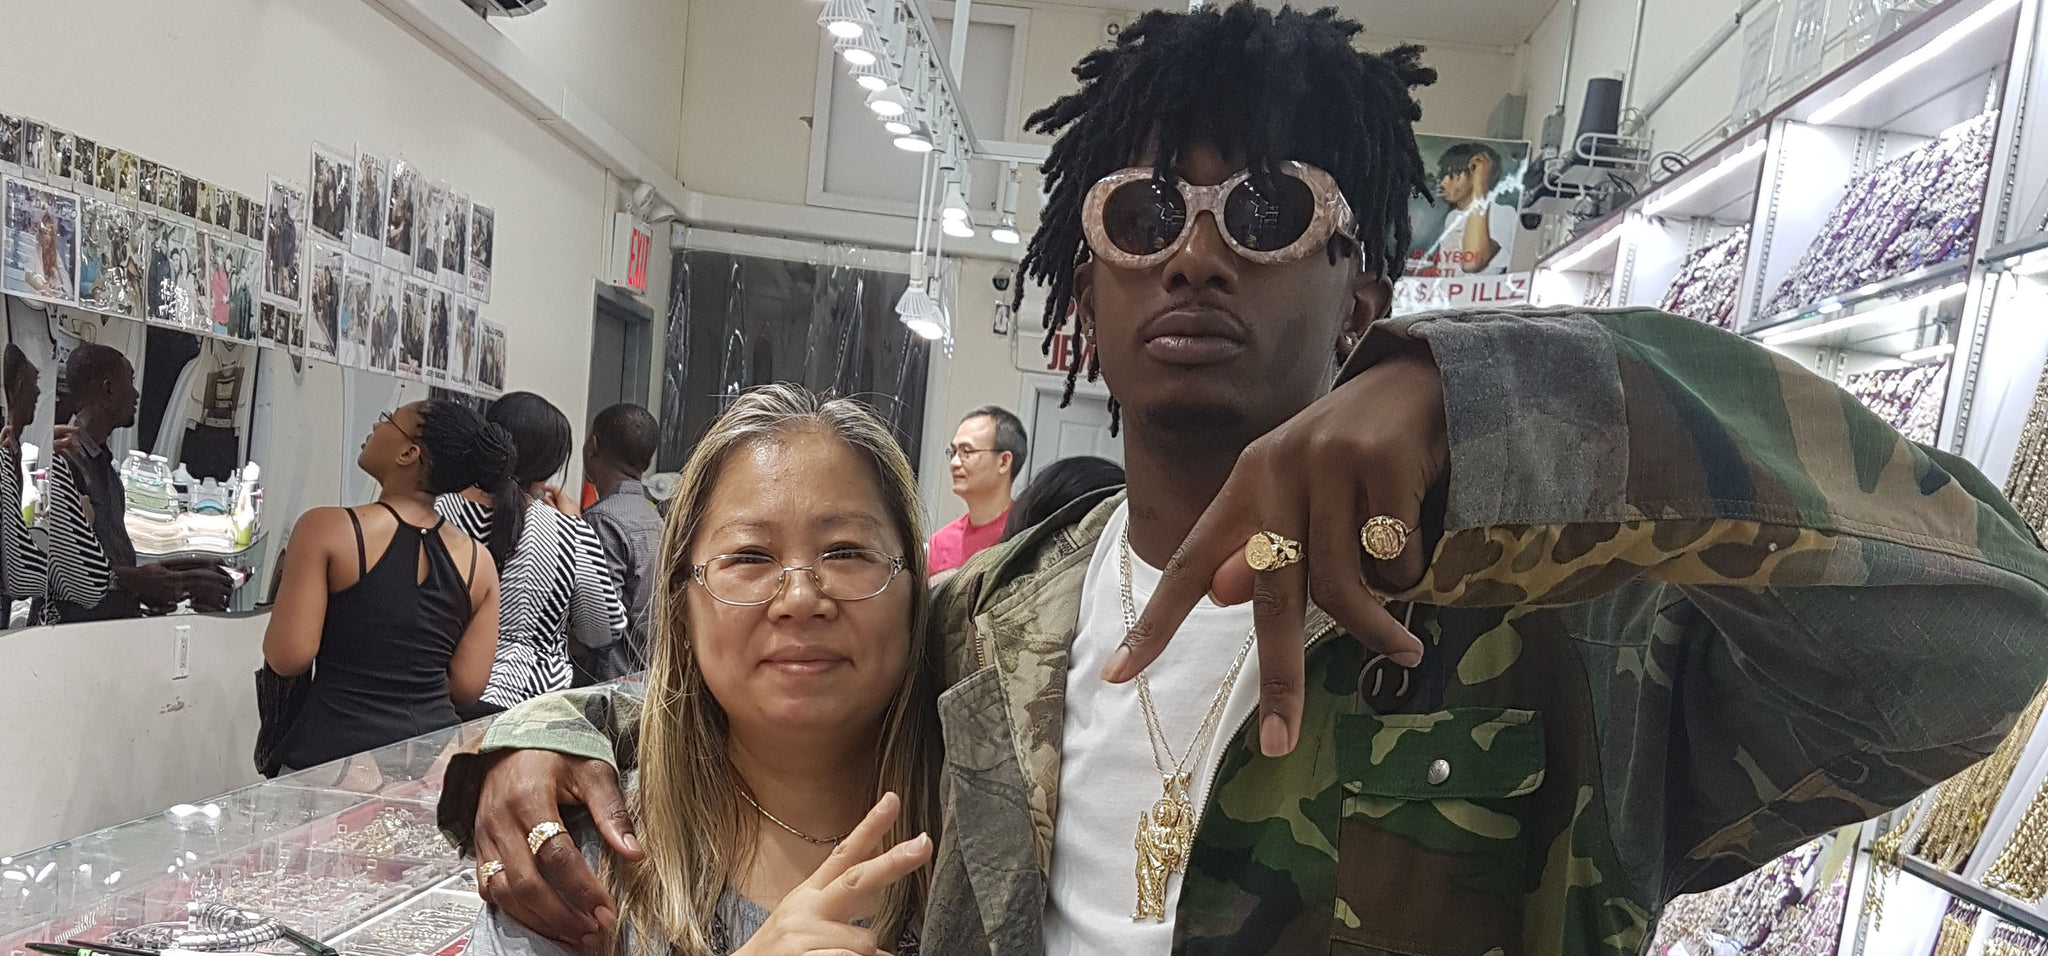 Playboi Carti who is a rapper from from Atlanta, Georgia who signed with Awful Records. In this picture he is on the right posing with ASAP Eva who is on the left at Popular Jewelry